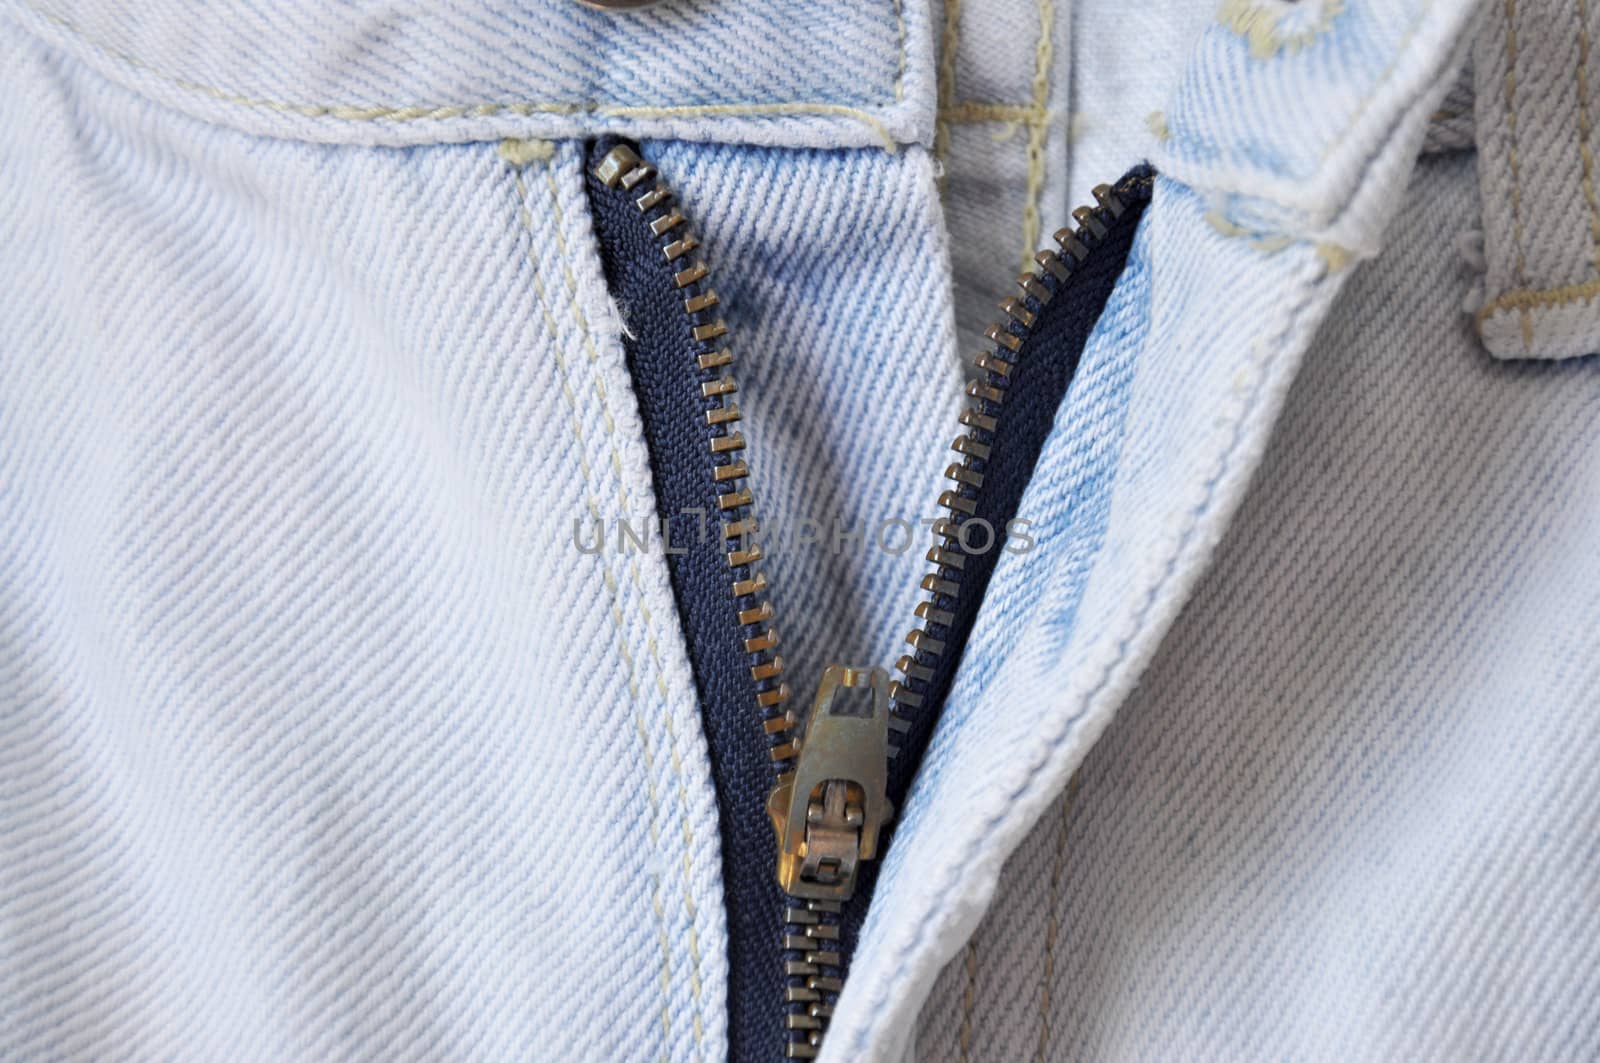 Detail of zipper on the jean.